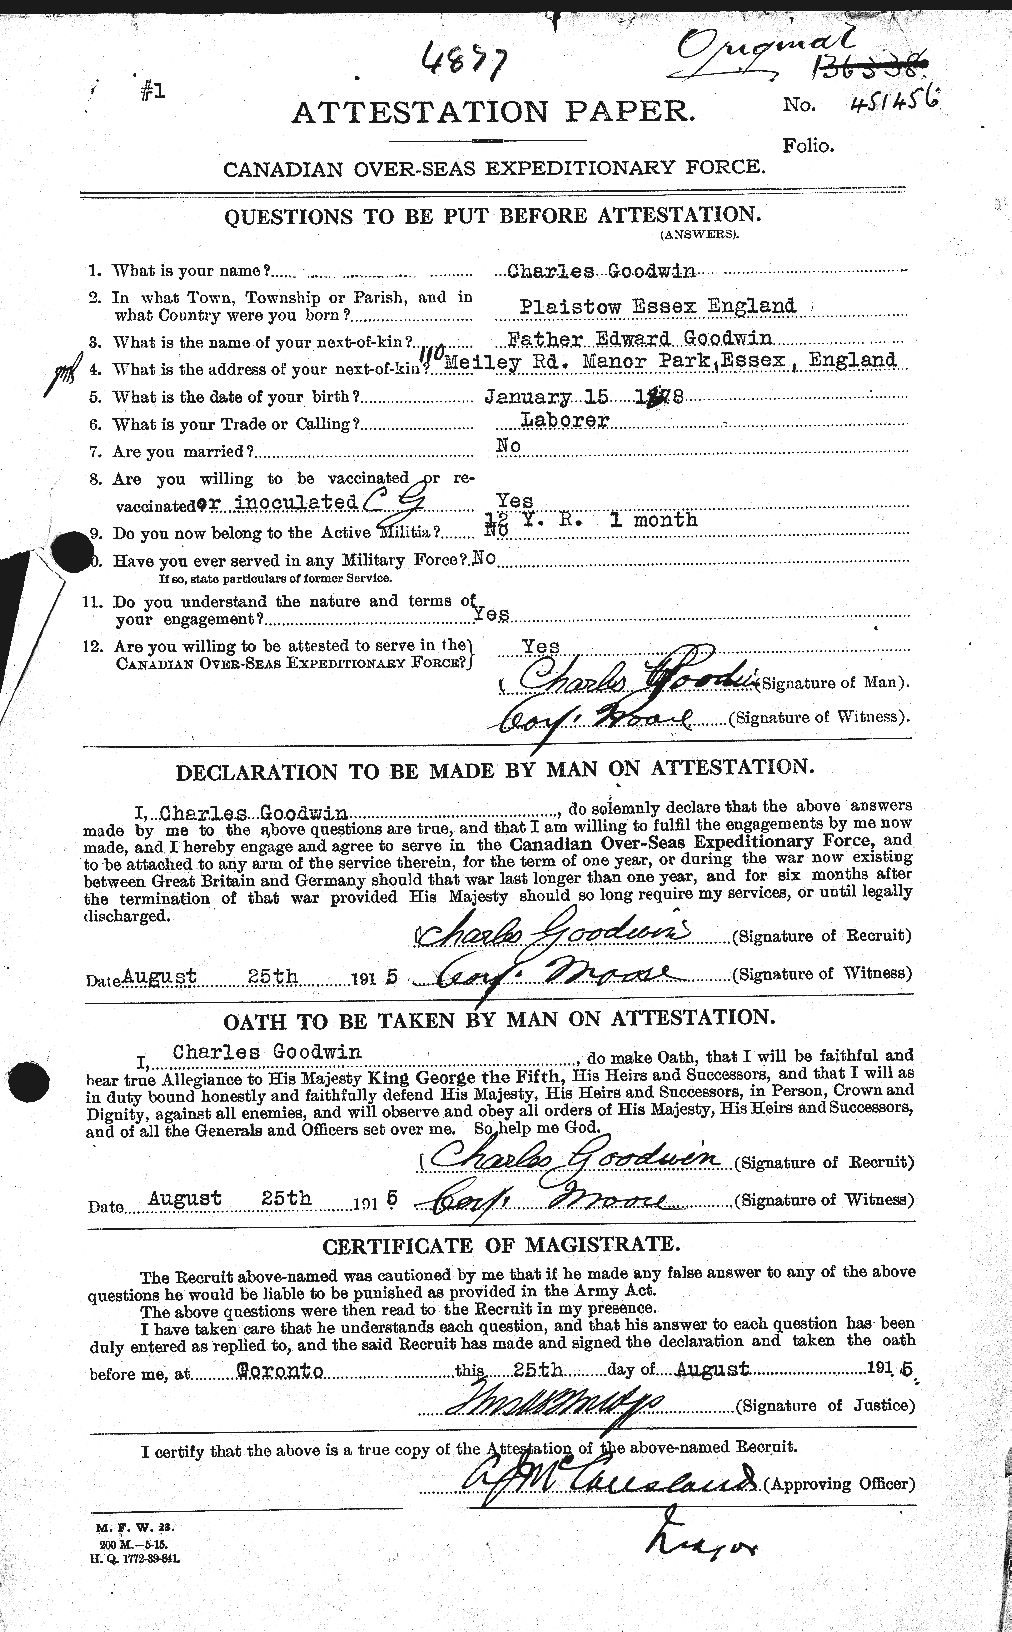 Personnel Records of the First World War - CEF 357942a